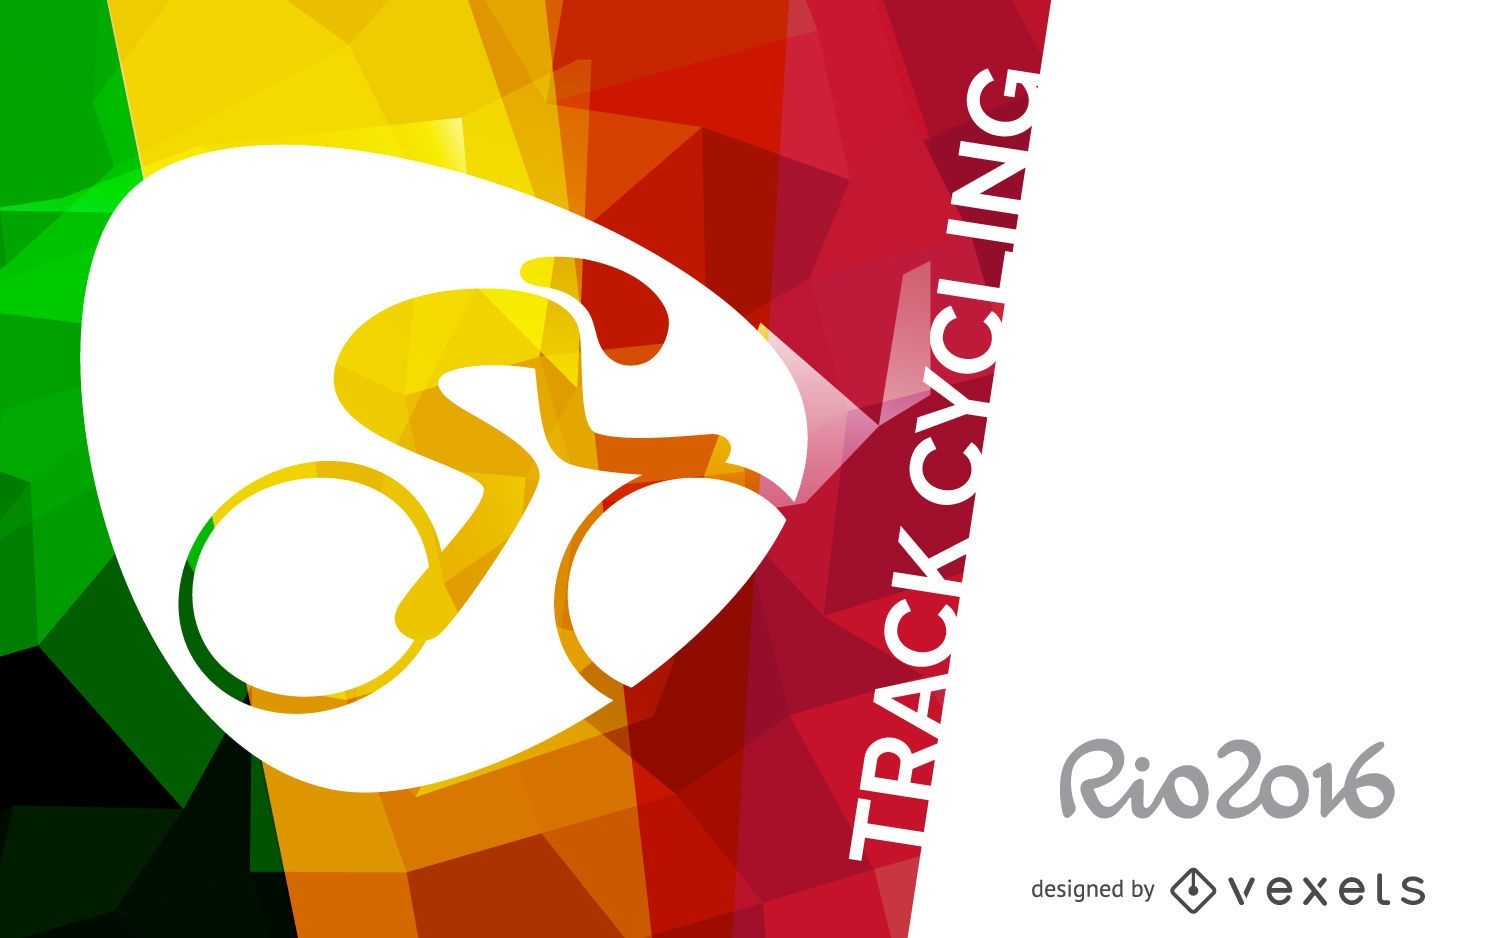 Rio 2016 track cycling banner